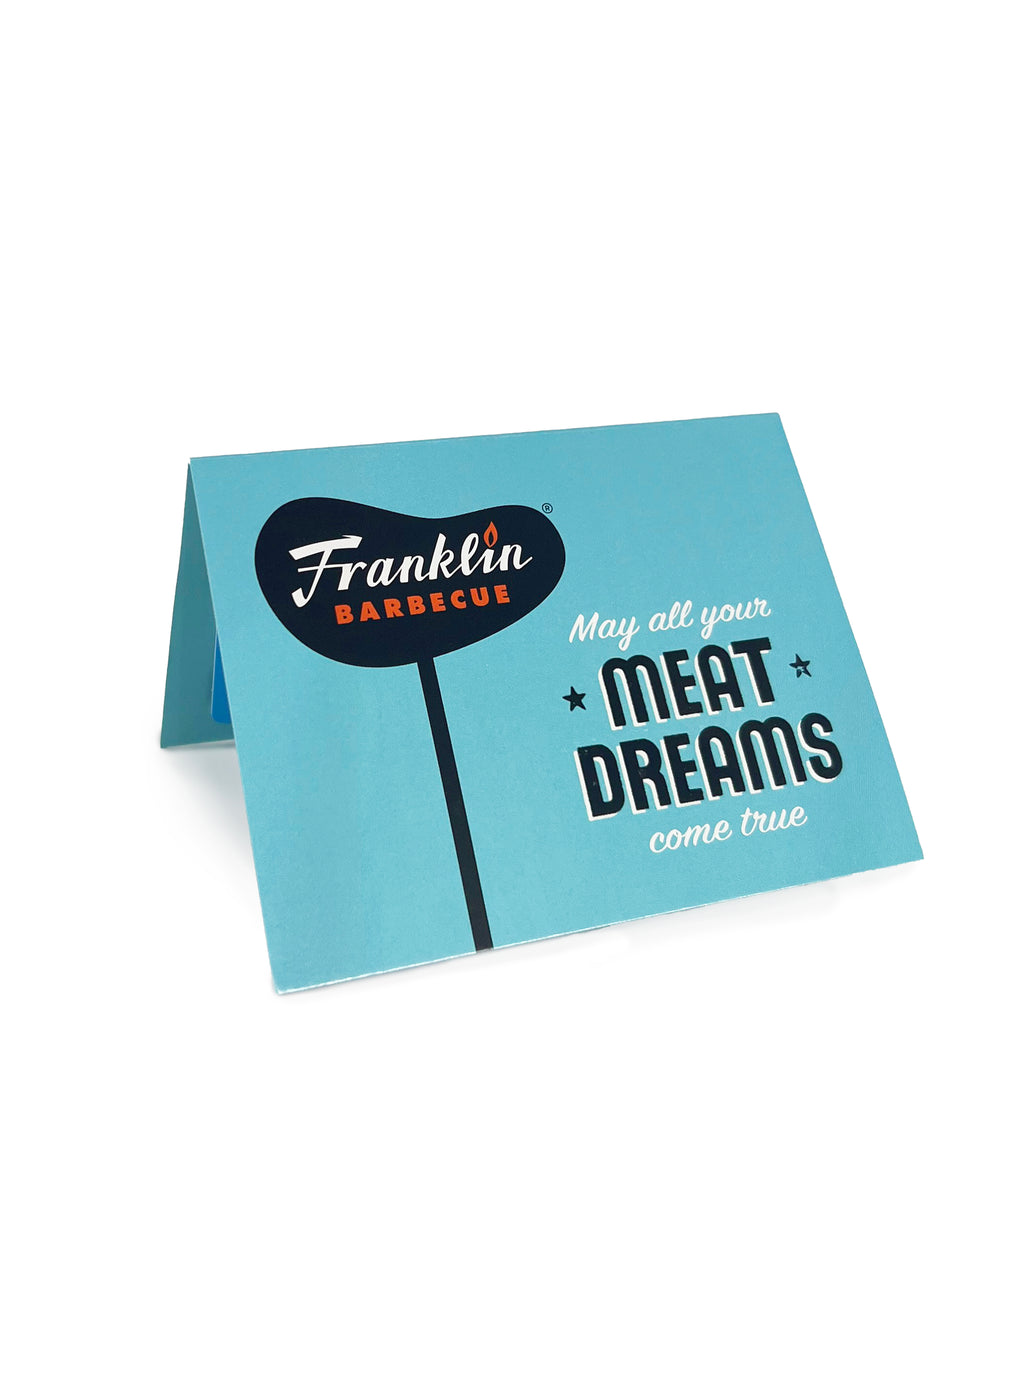 Turquoise blue card with Franklin Barbecue sign and text saying "May all of your meat dreams come true". Card is folded in half